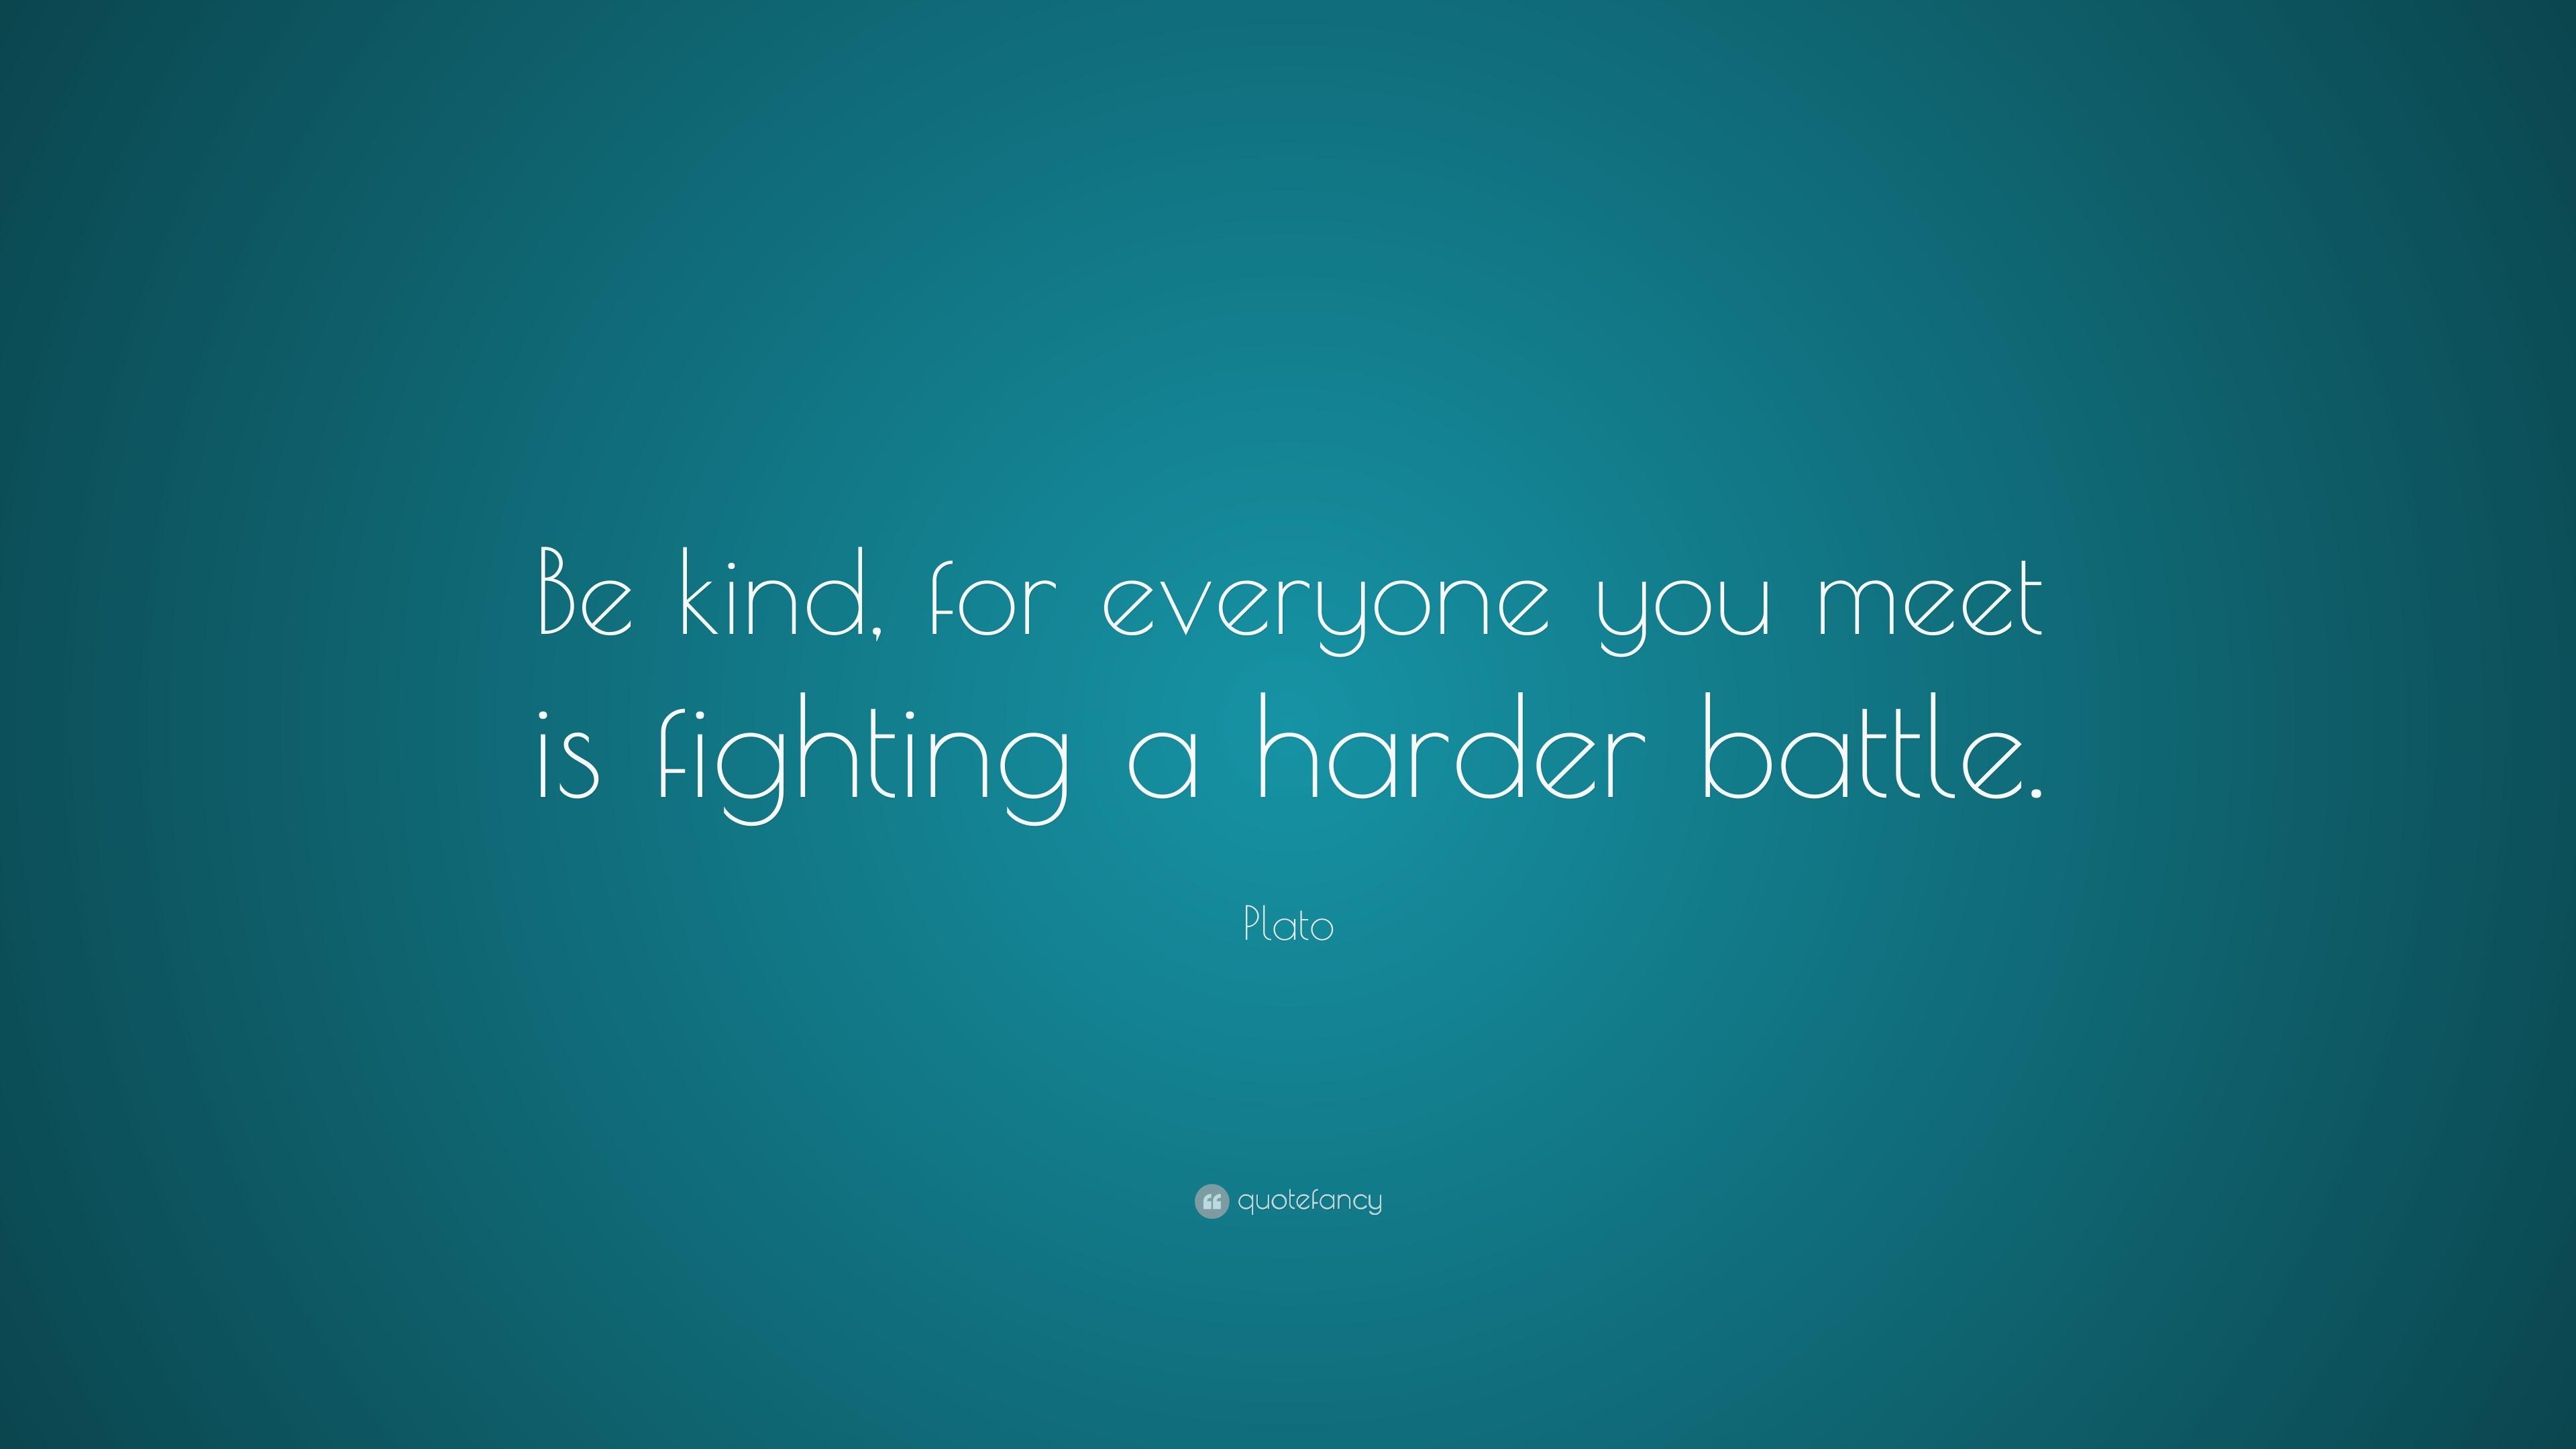 Plato Quote: “Be Kind, For Everyone You Meet Is Fighting A Harder Battle.”